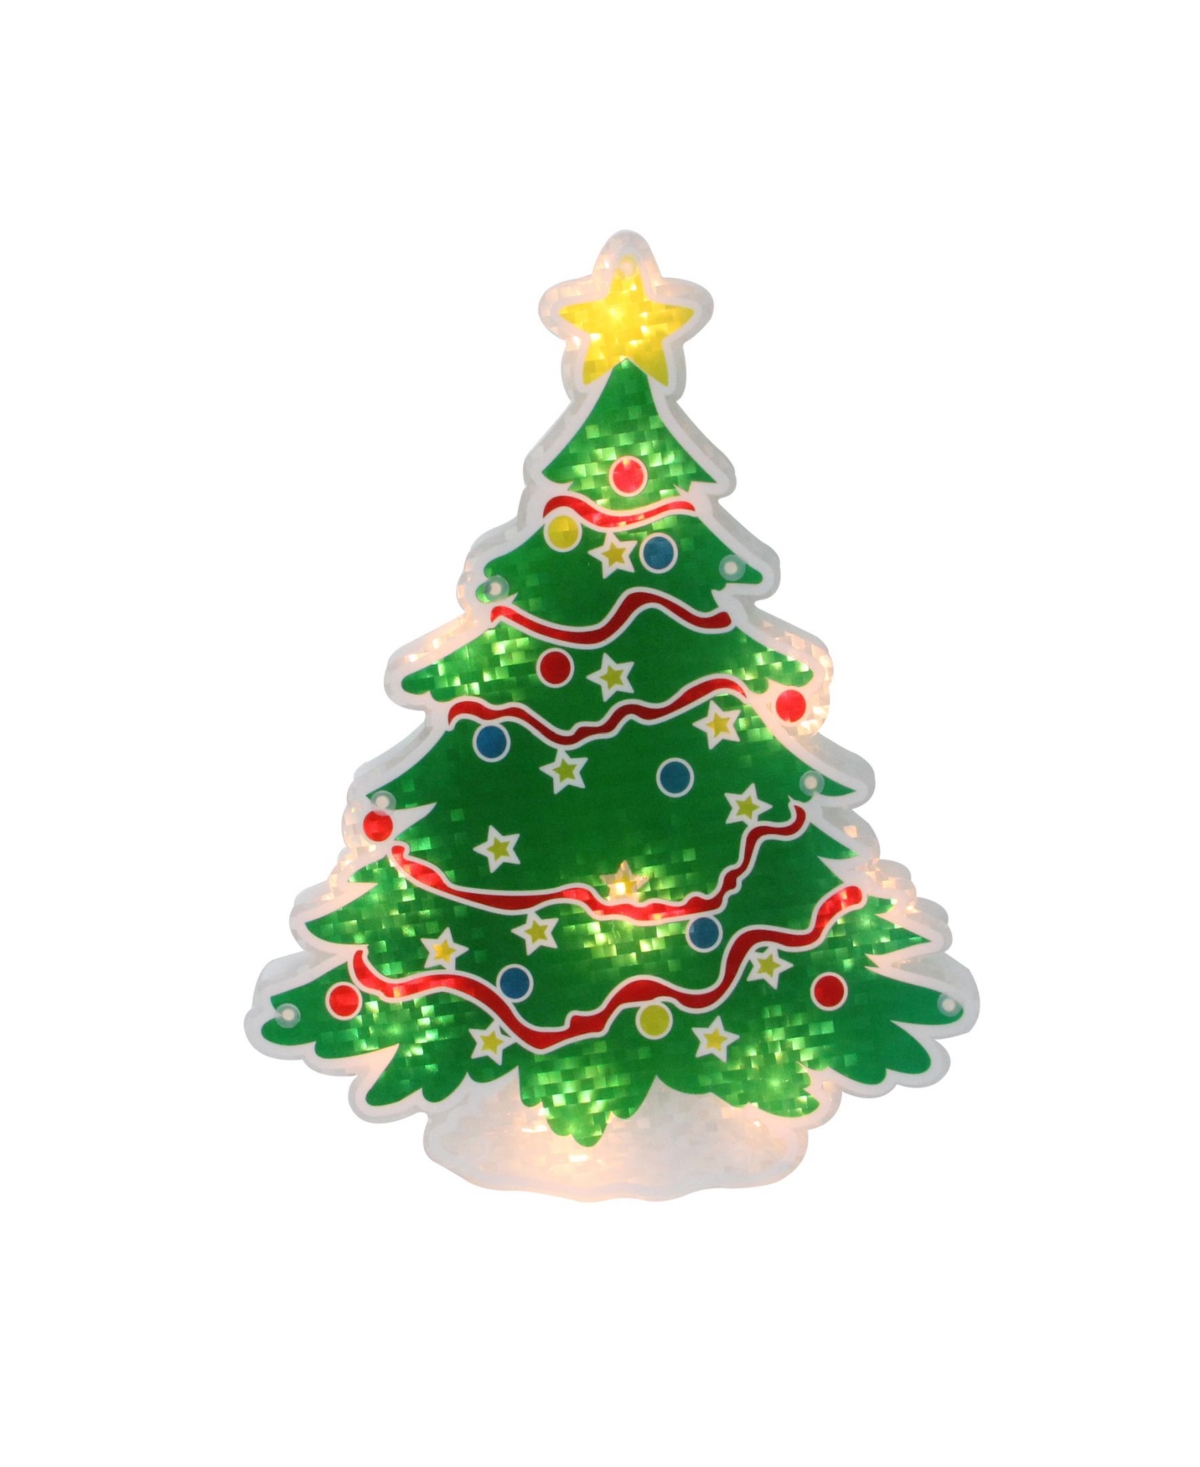 12.5" Lighted Holographic Christmas Tree Window Silhouette Decoration - Red